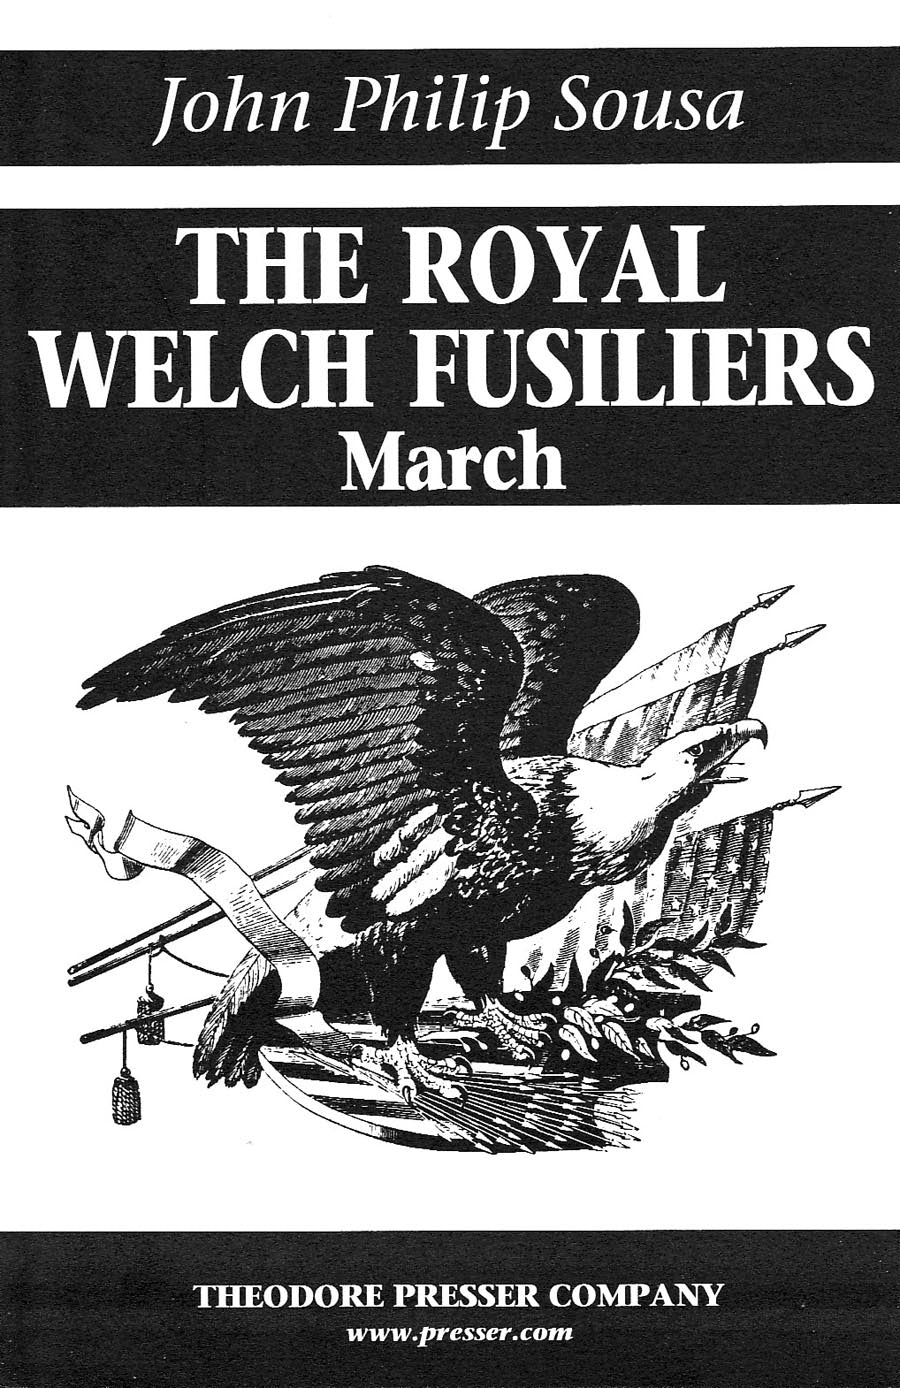 Sousa: The Royal Welch Rusiliers